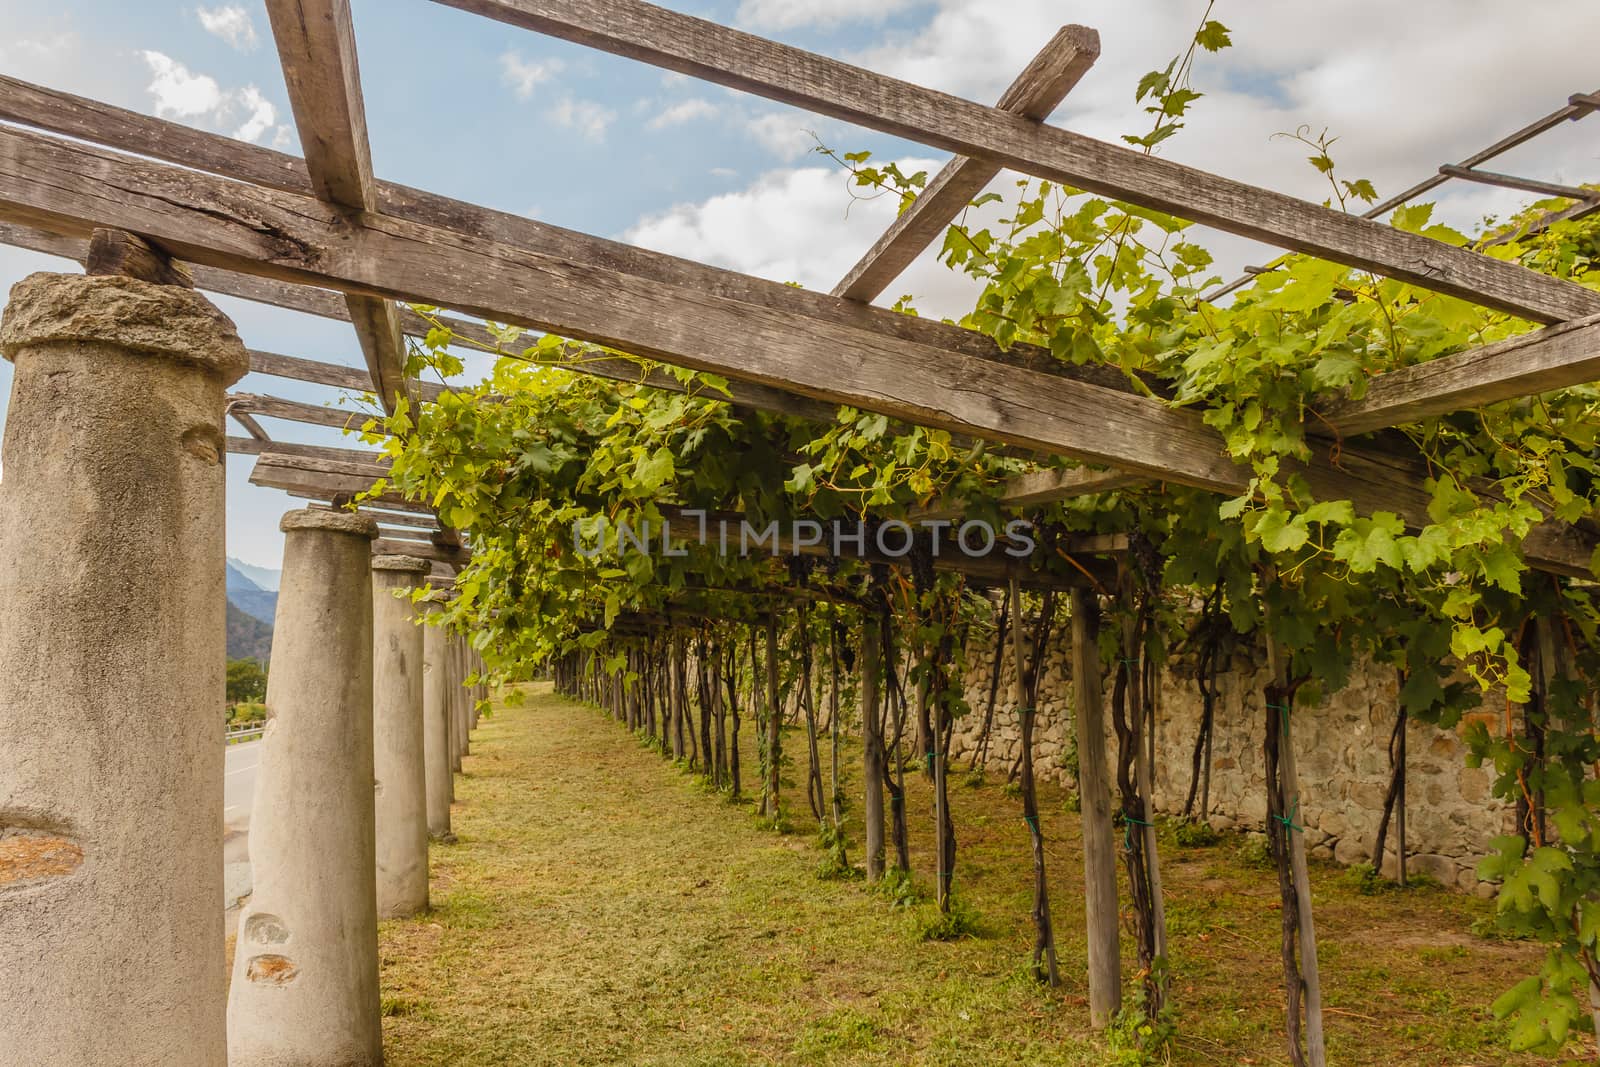 pylons made of stone and lime columns and chestnut poles support the pergola of rows of grapes and they store the heat of the sun and release it overnight at the clusters